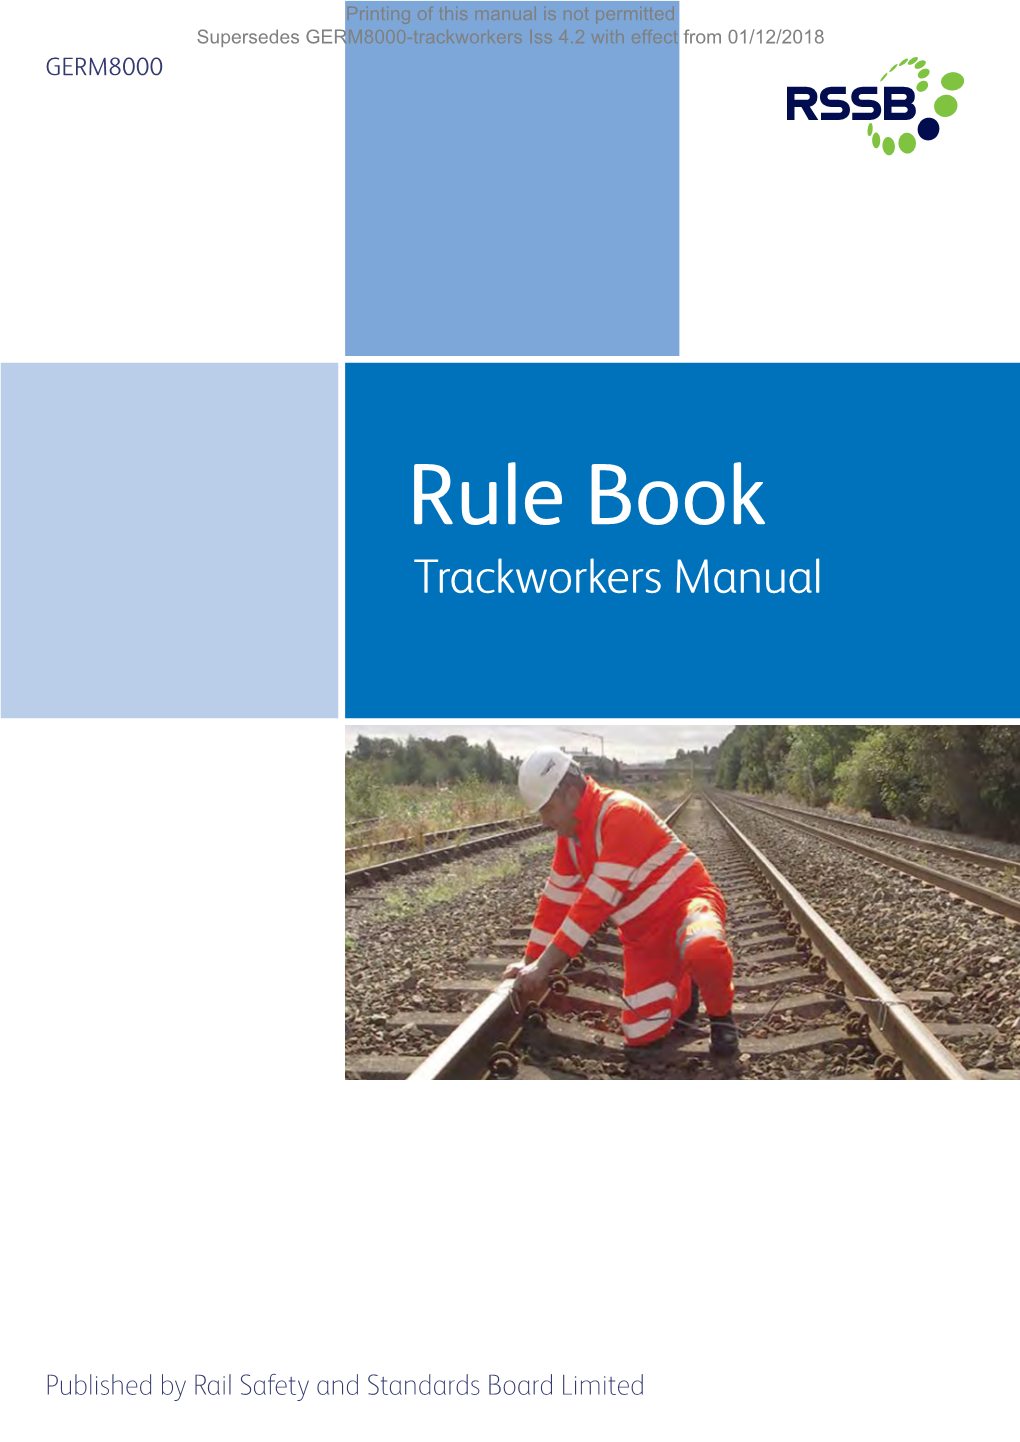 Trackworkers Manual